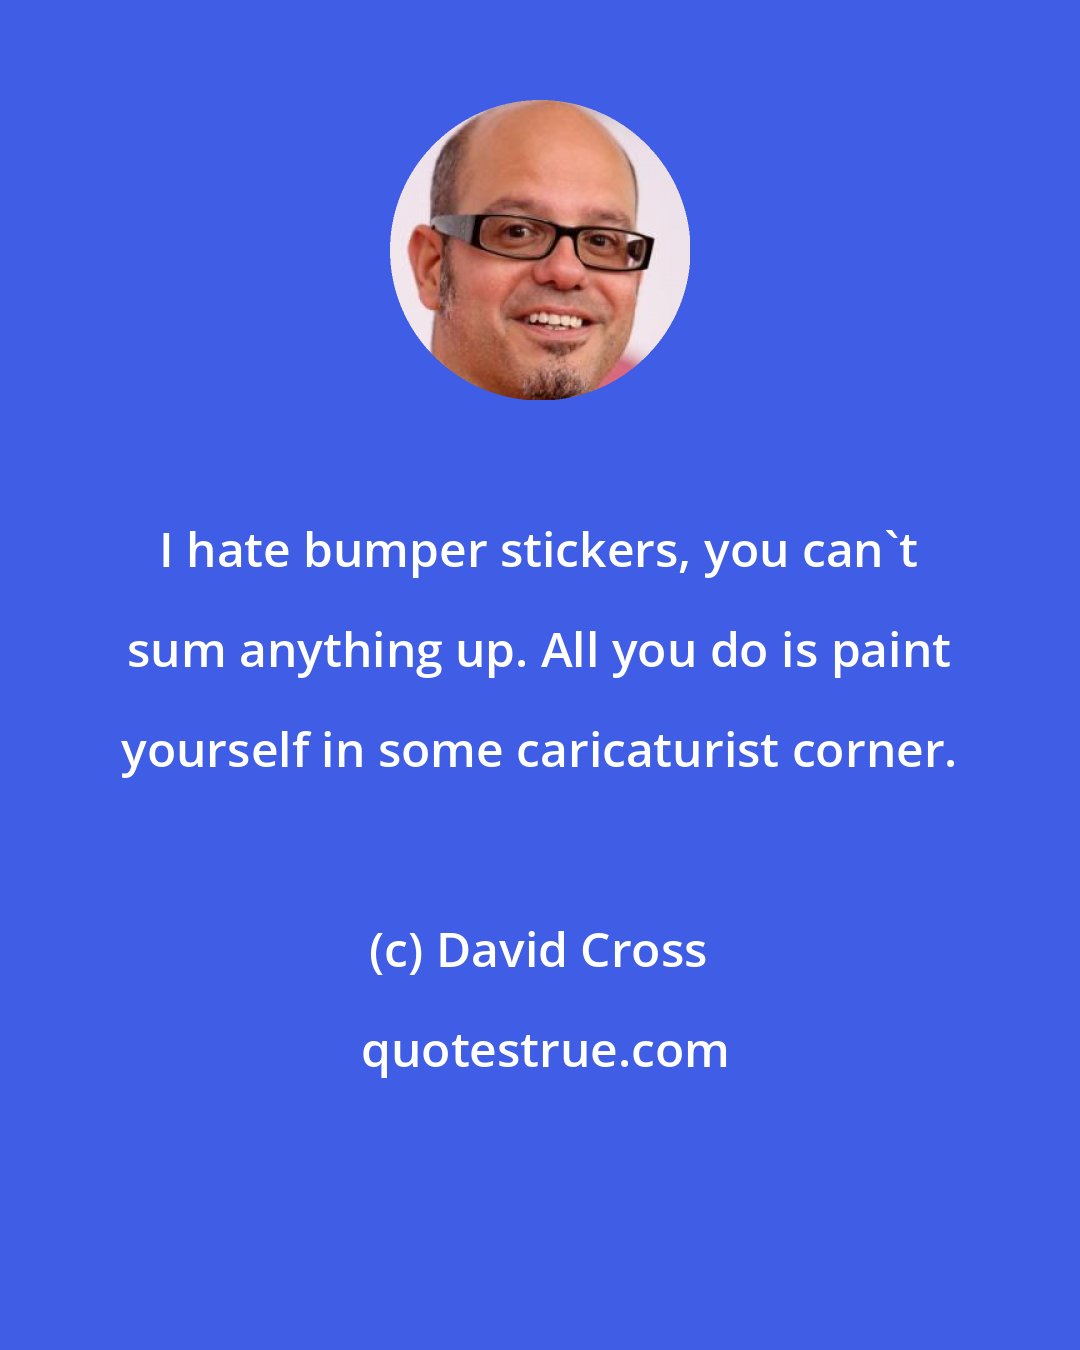 David Cross: I hate bumper stickers, you can't sum anything up. All you do is paint yourself in some caricaturist corner.